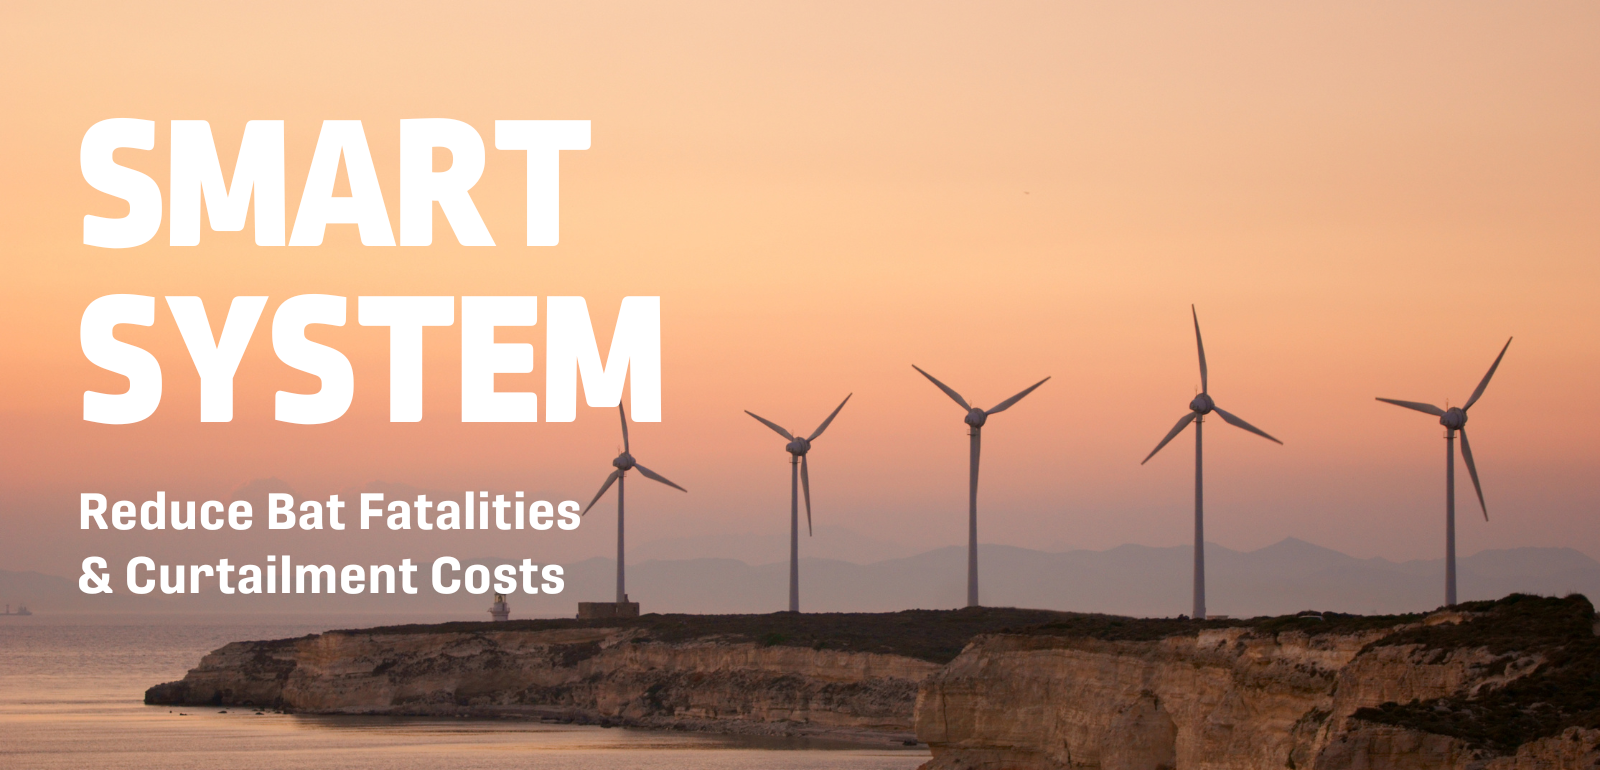 Reduce Bat Fatalities and Curtailment Costs with SMART